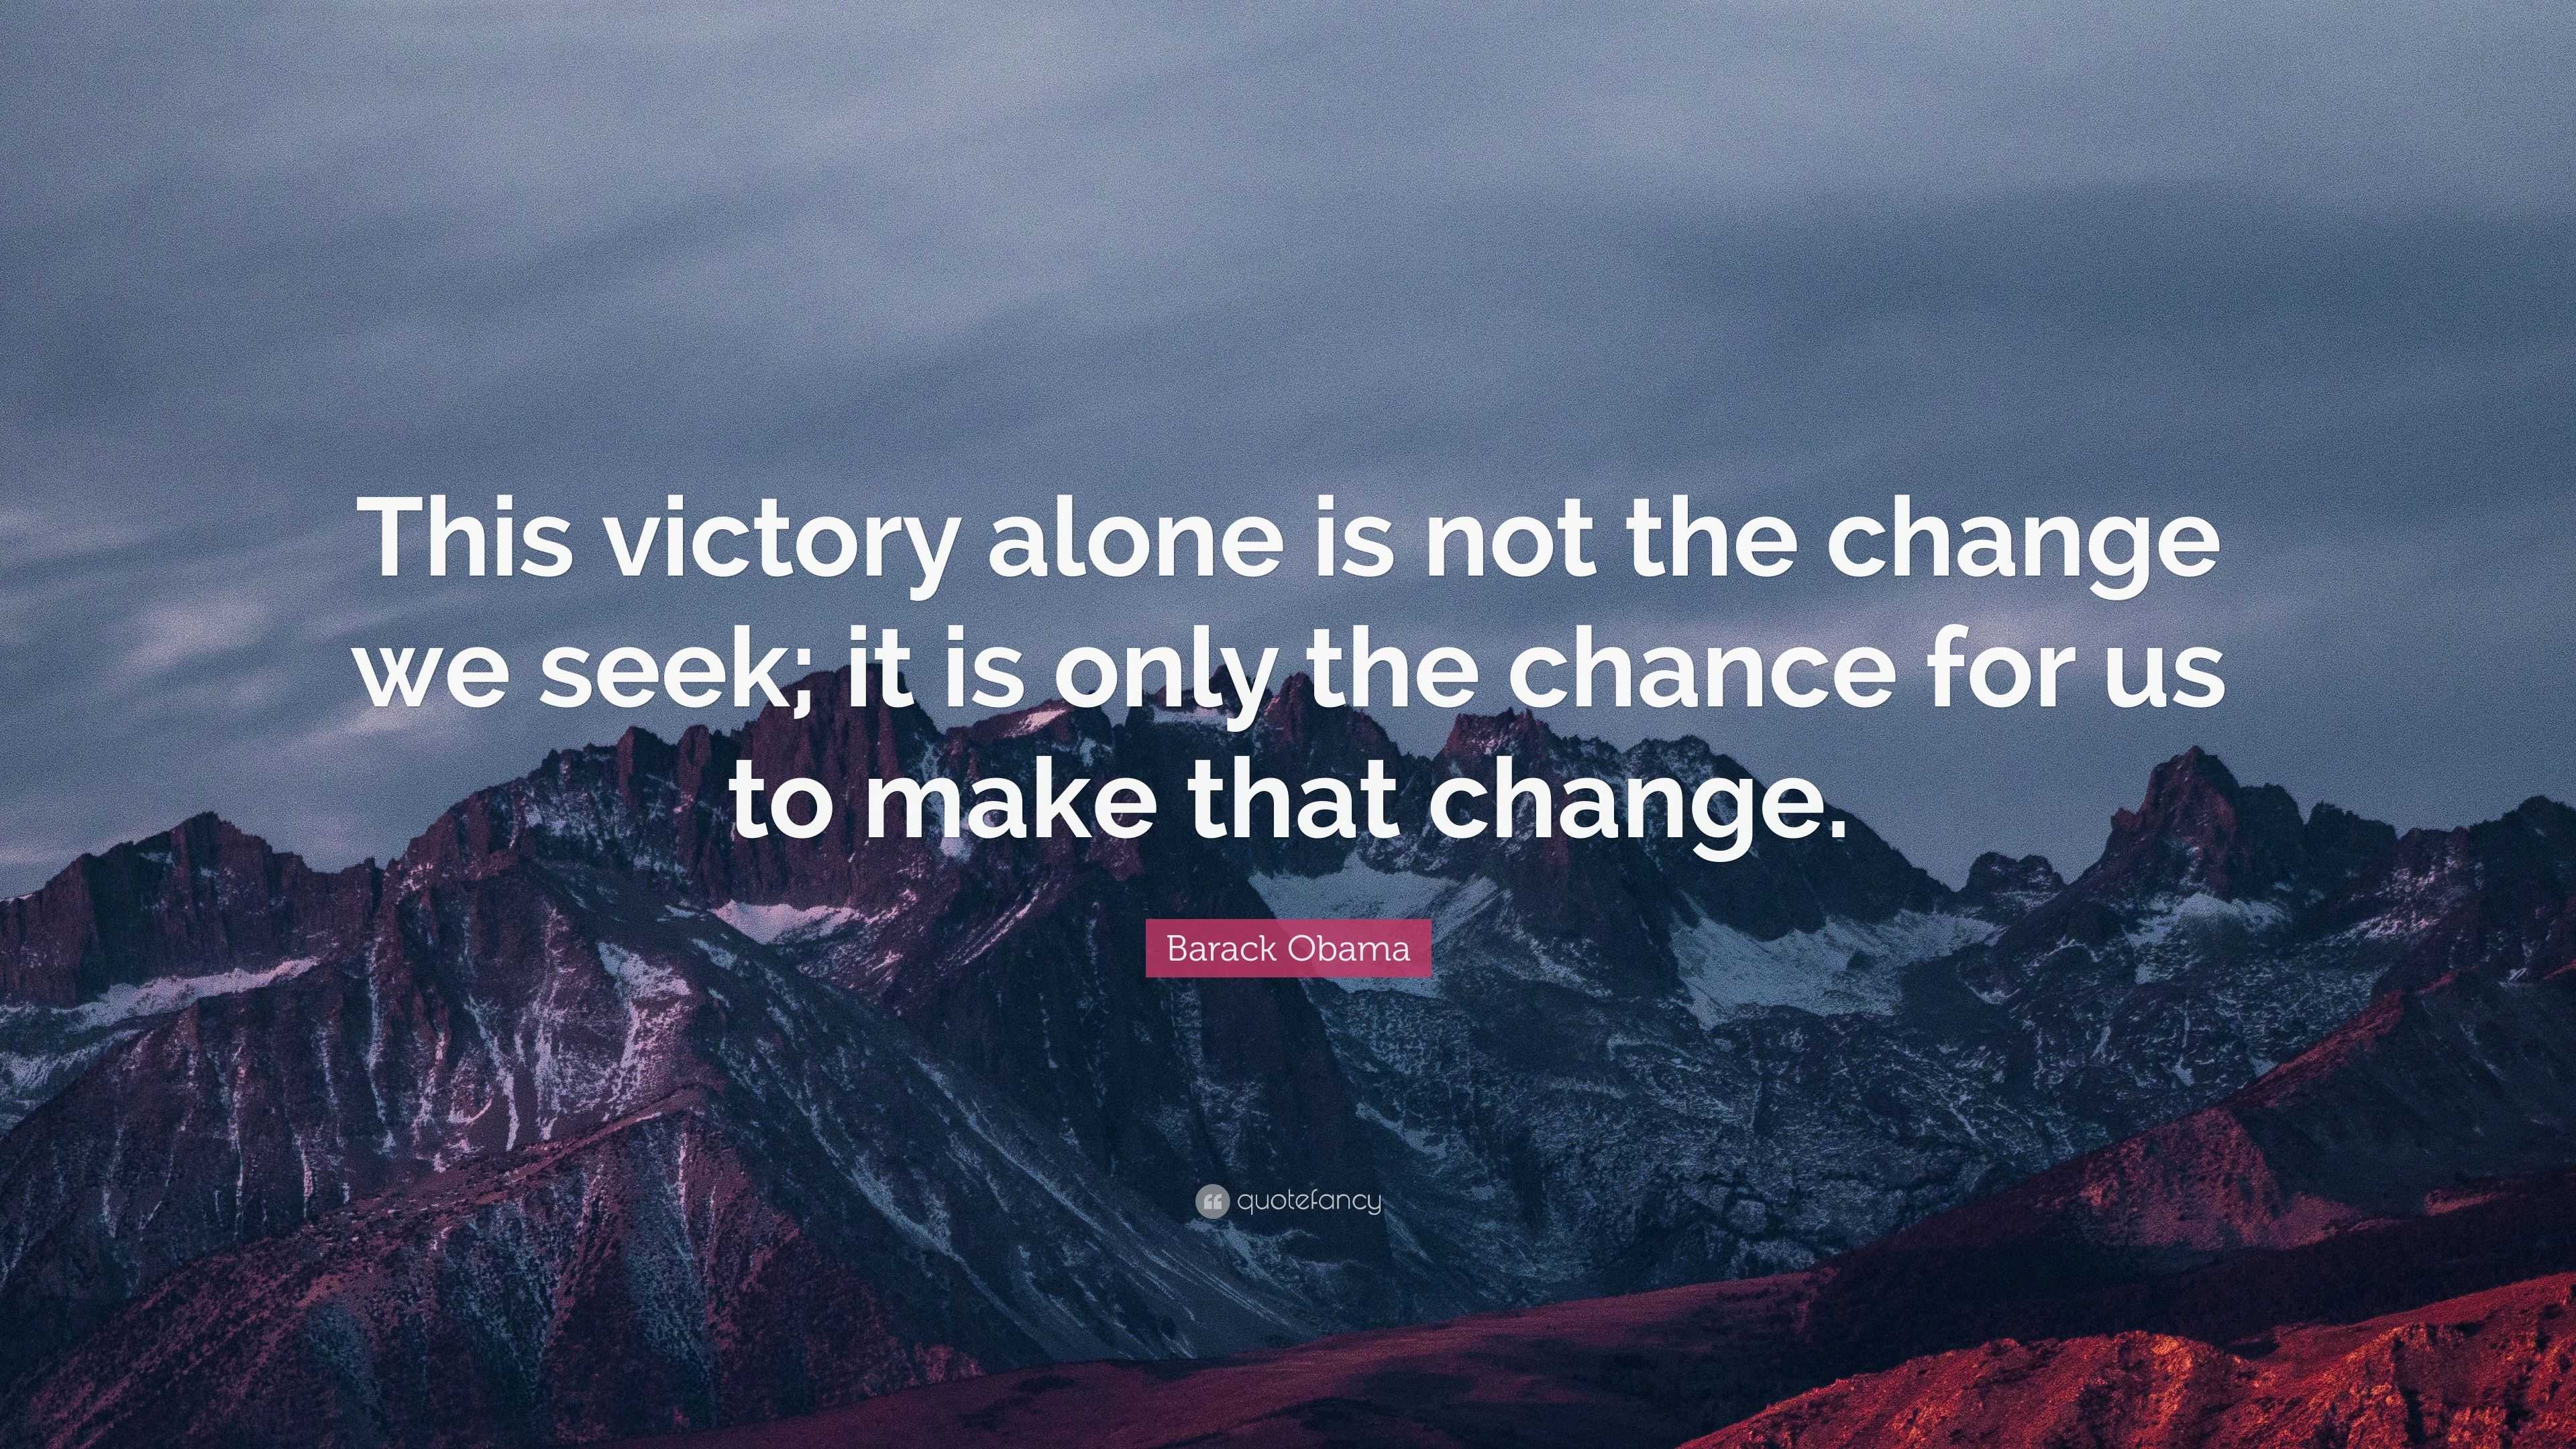 Barack Obama Quote: “This victory alone is not the change we seek; it ...